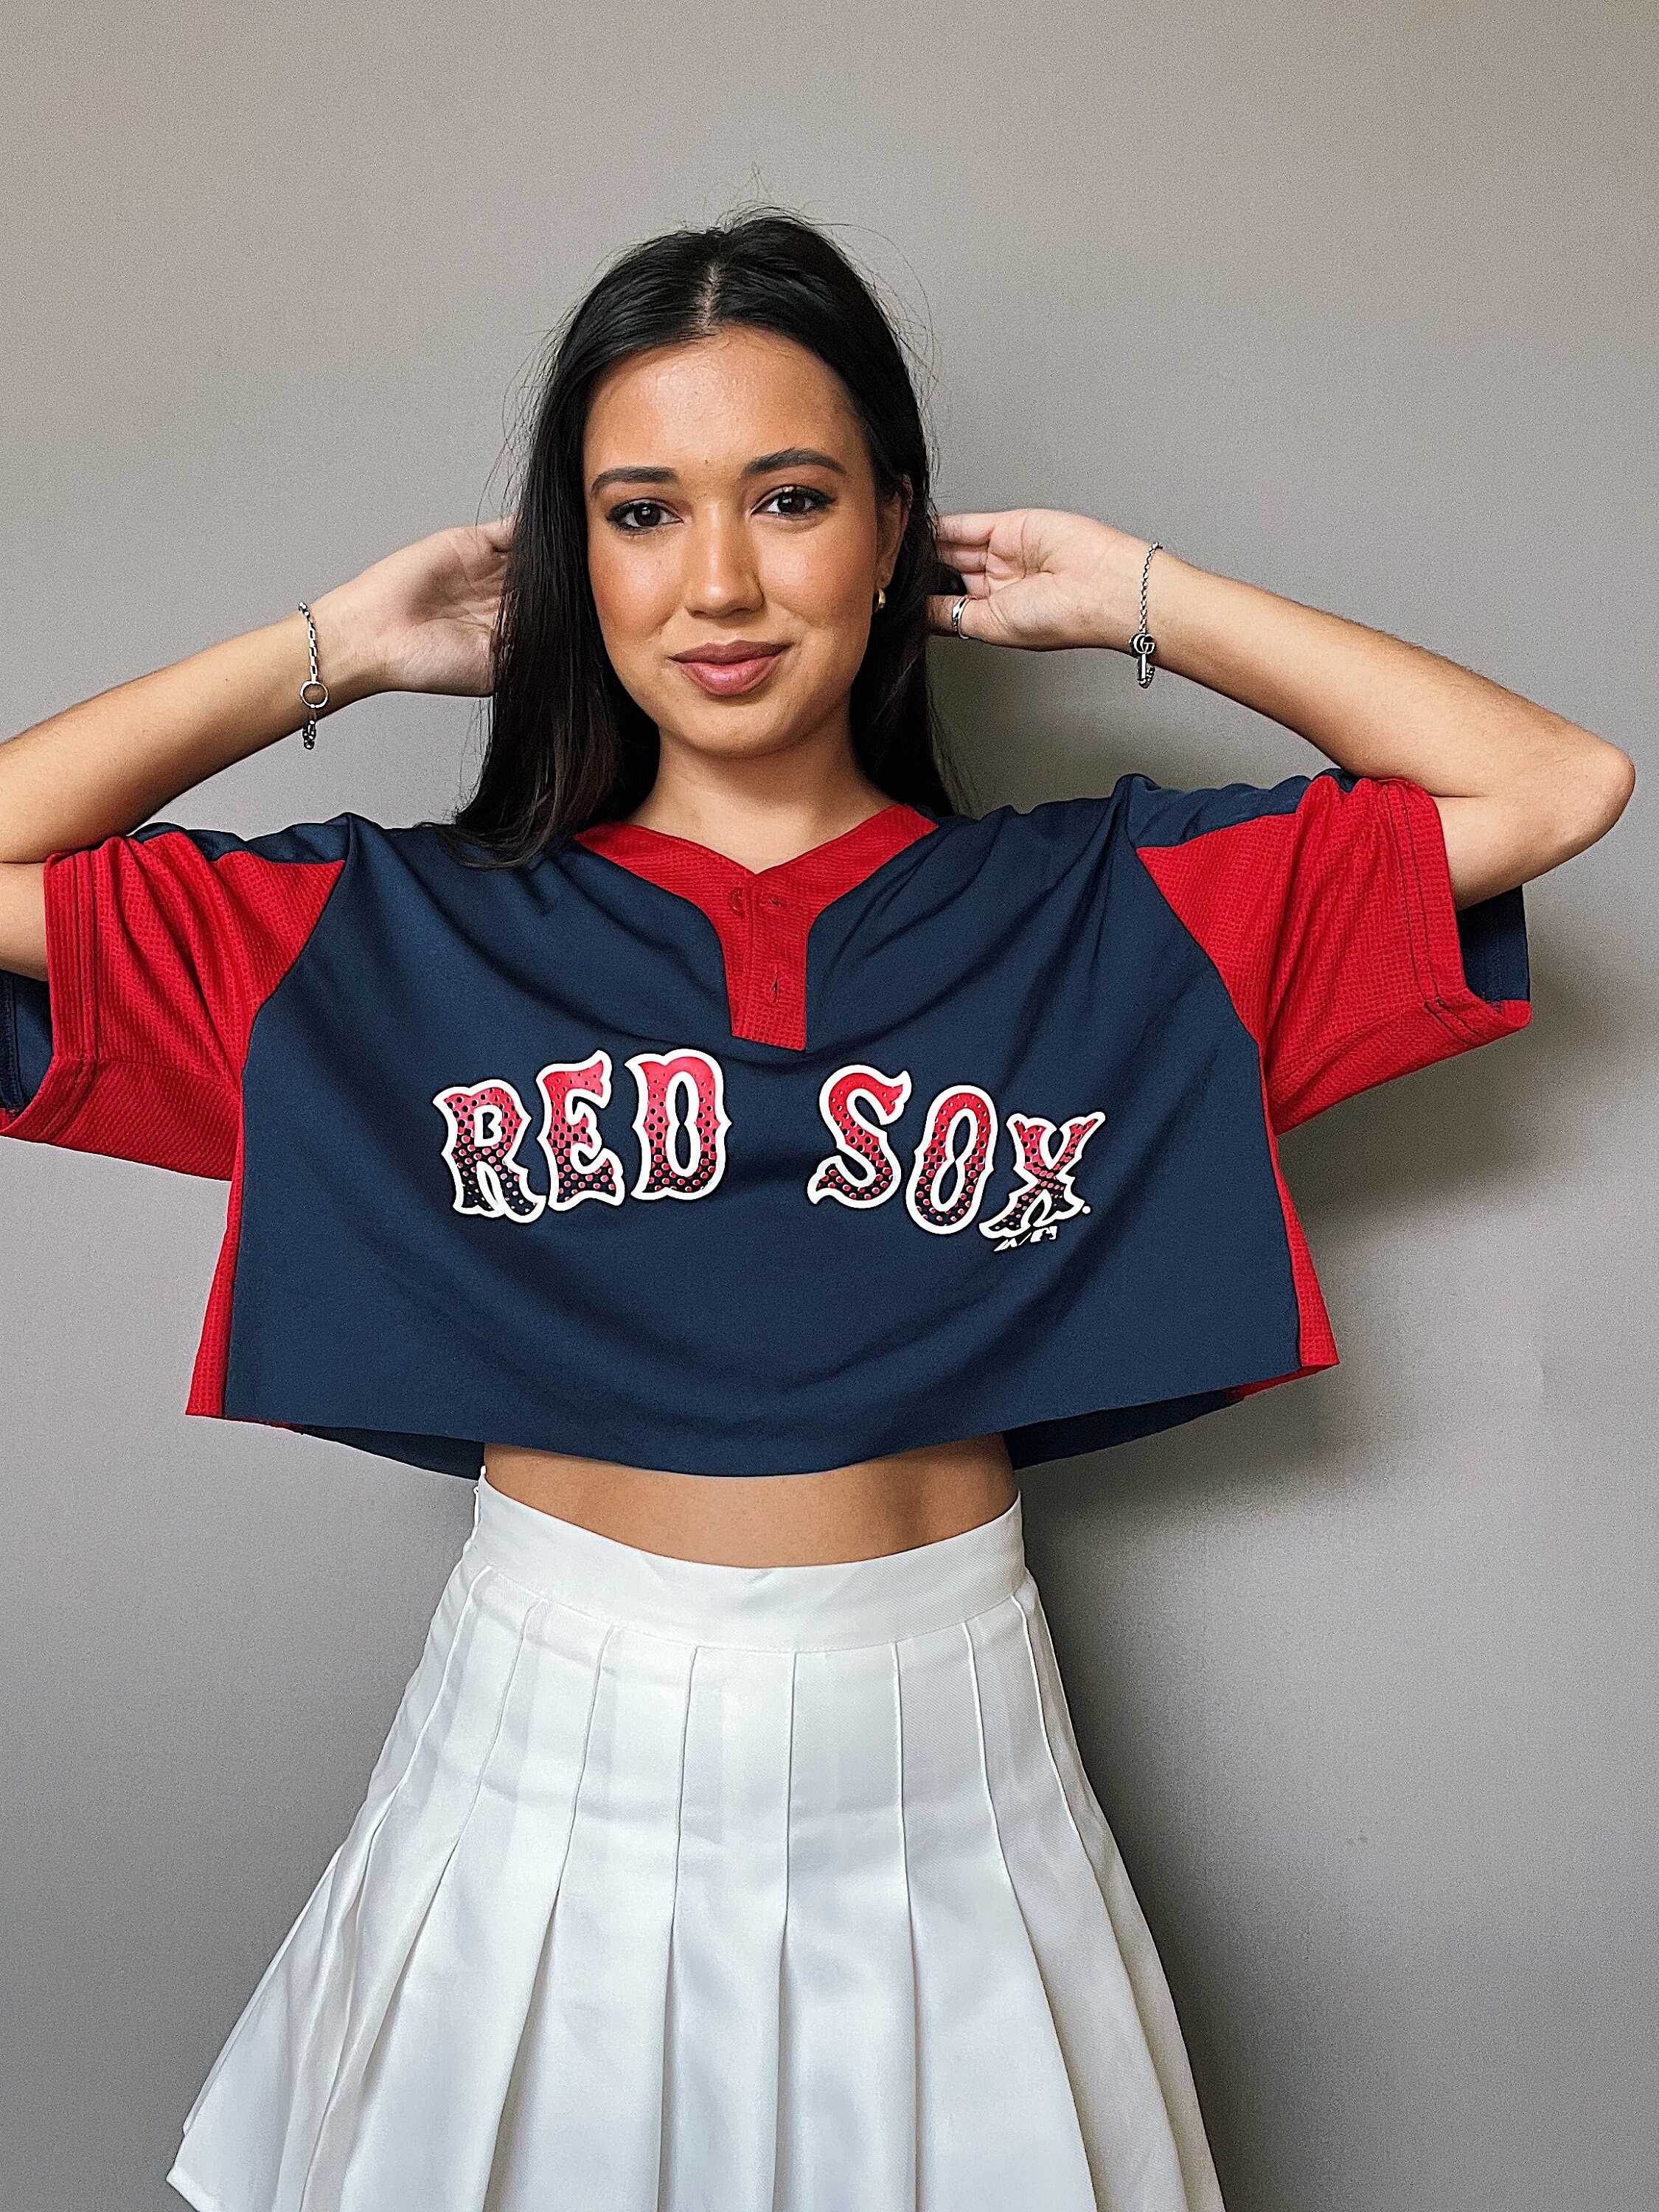 red sox cropped shirt